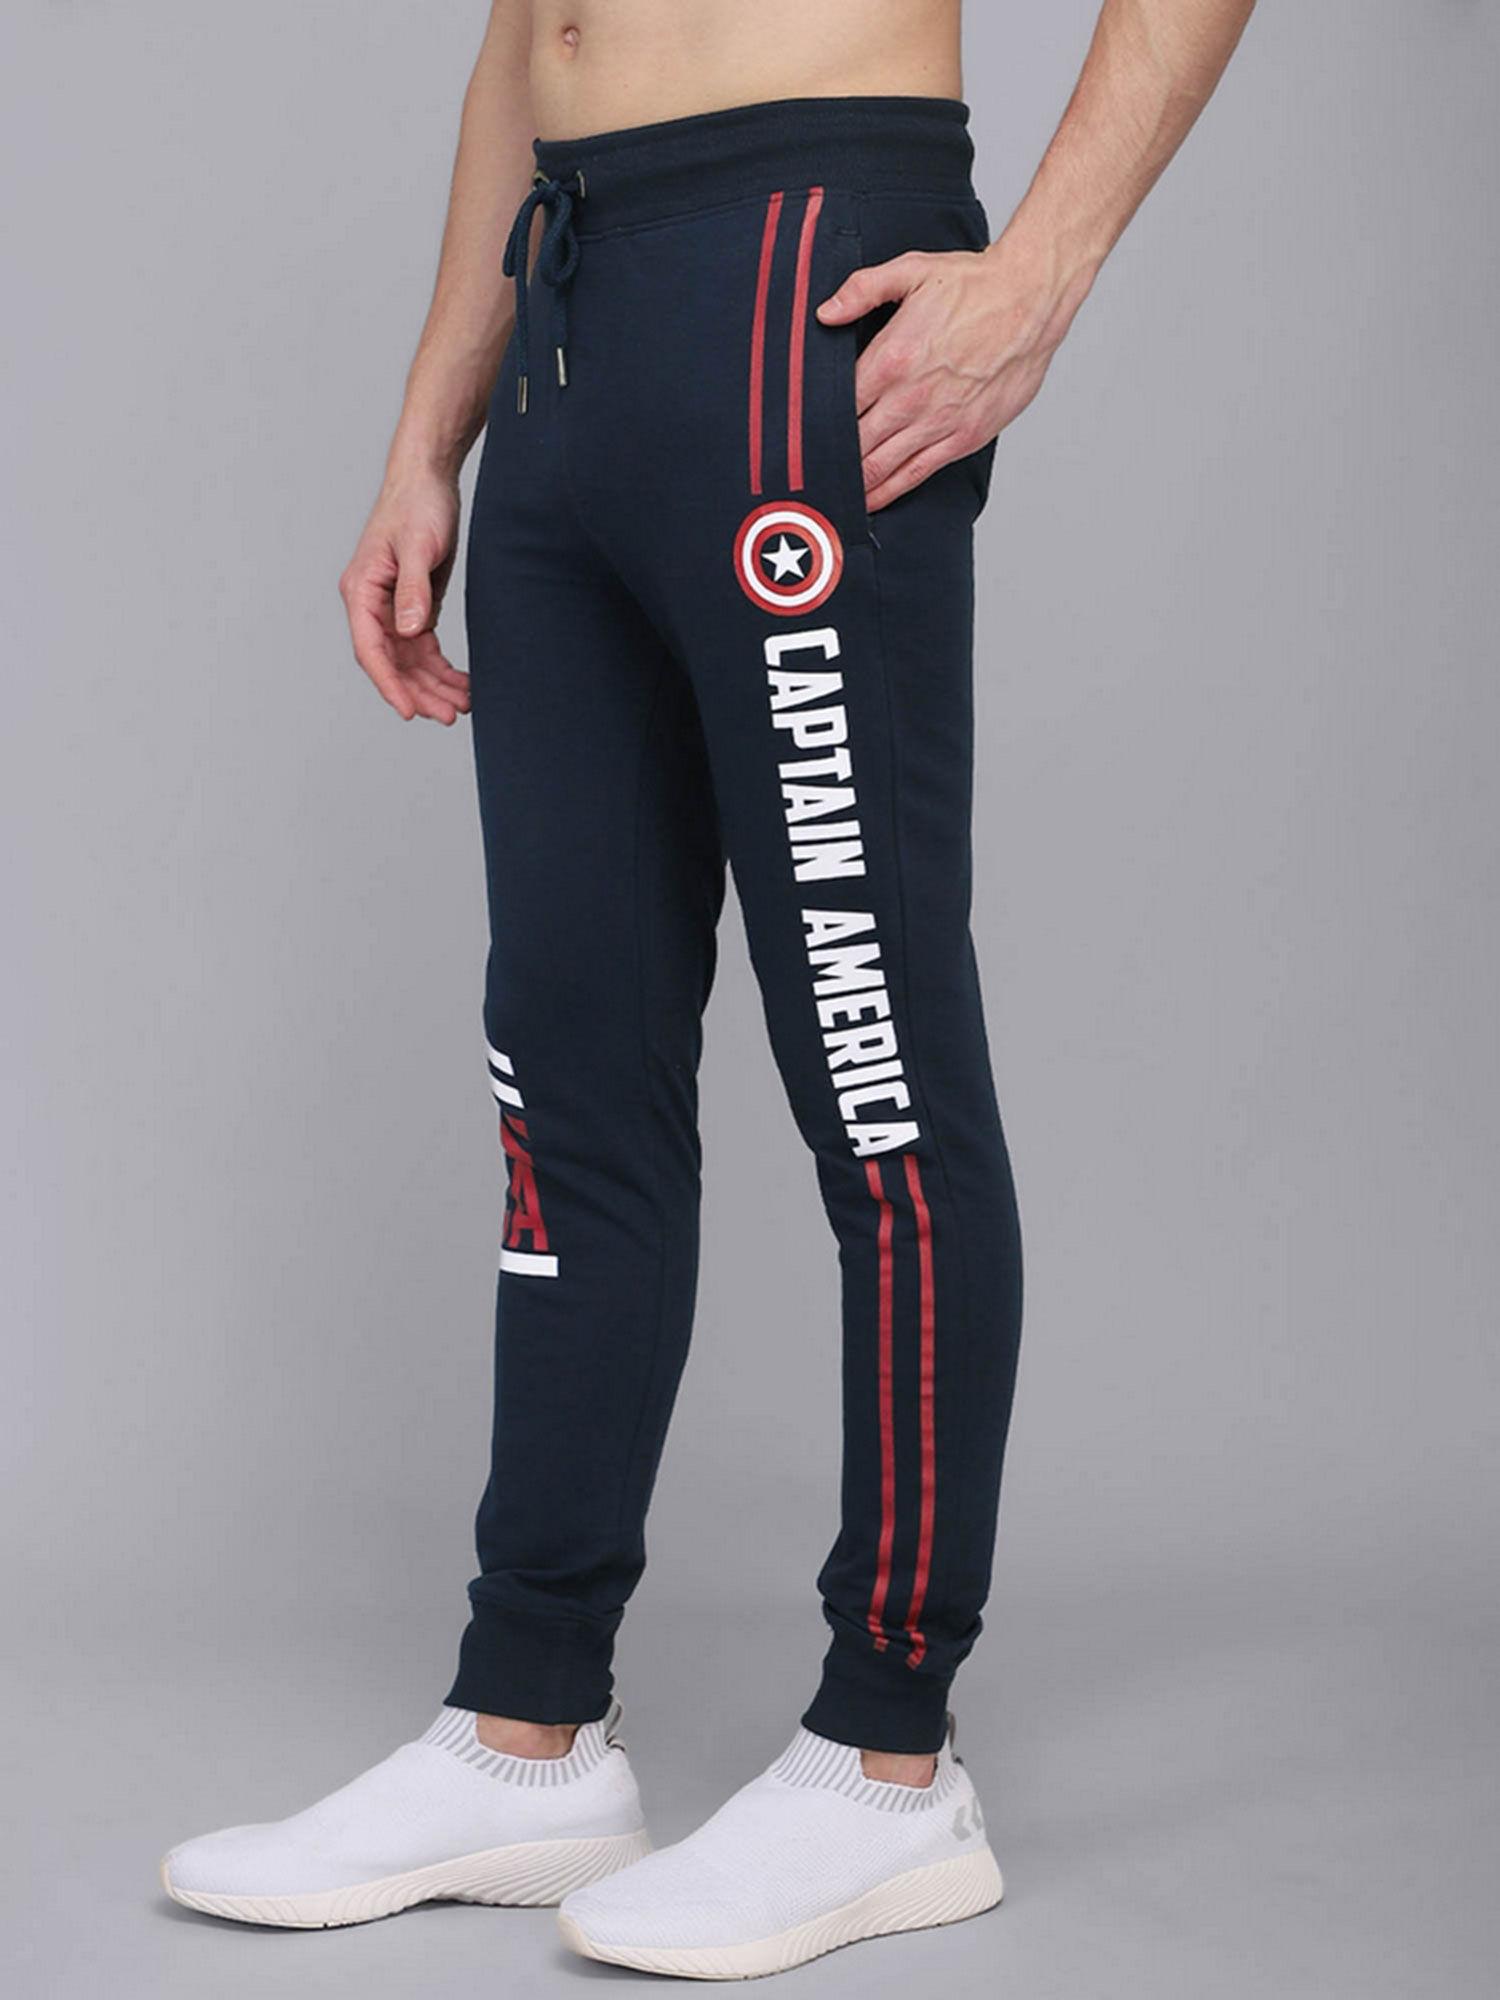 captain-america-featured-joggers-for-men